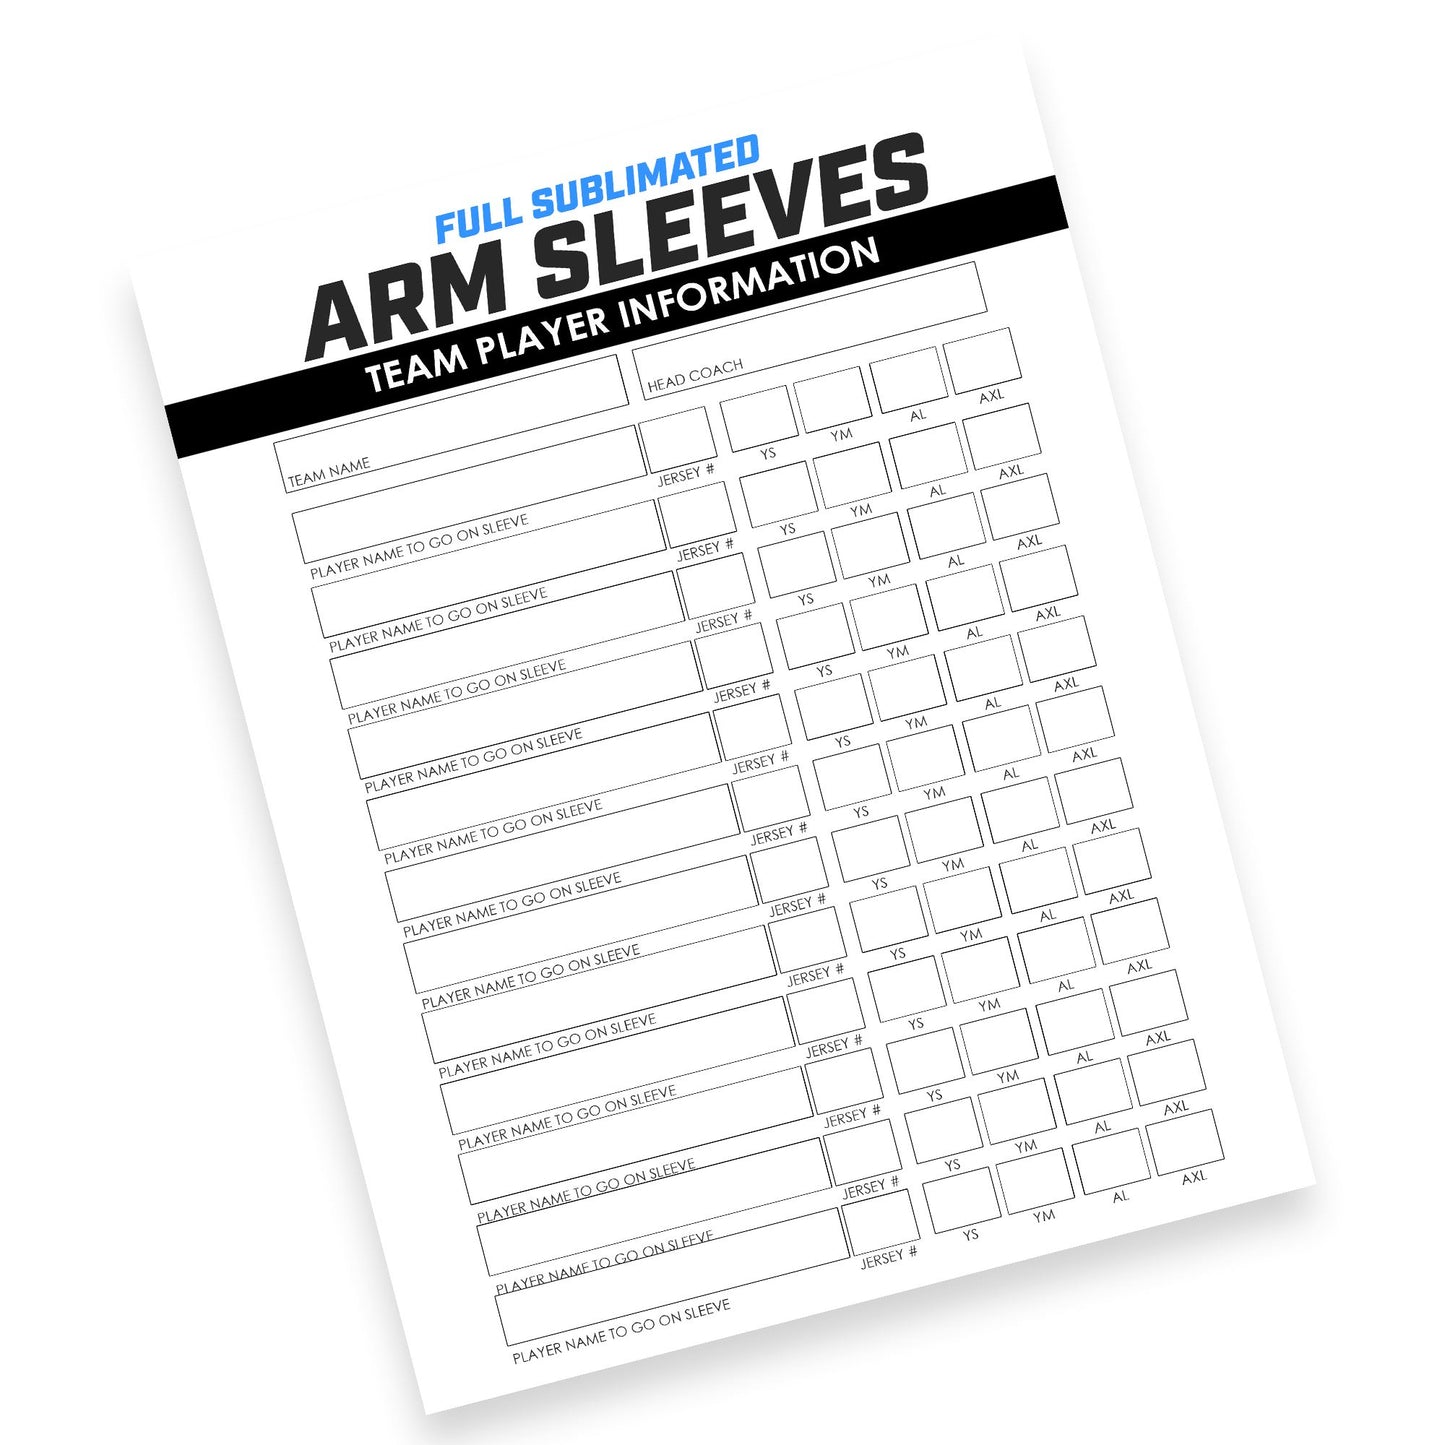 01 Arm Sleeve Marketing - FULL COLLECTION-Photoshop Template - PSMGraphix